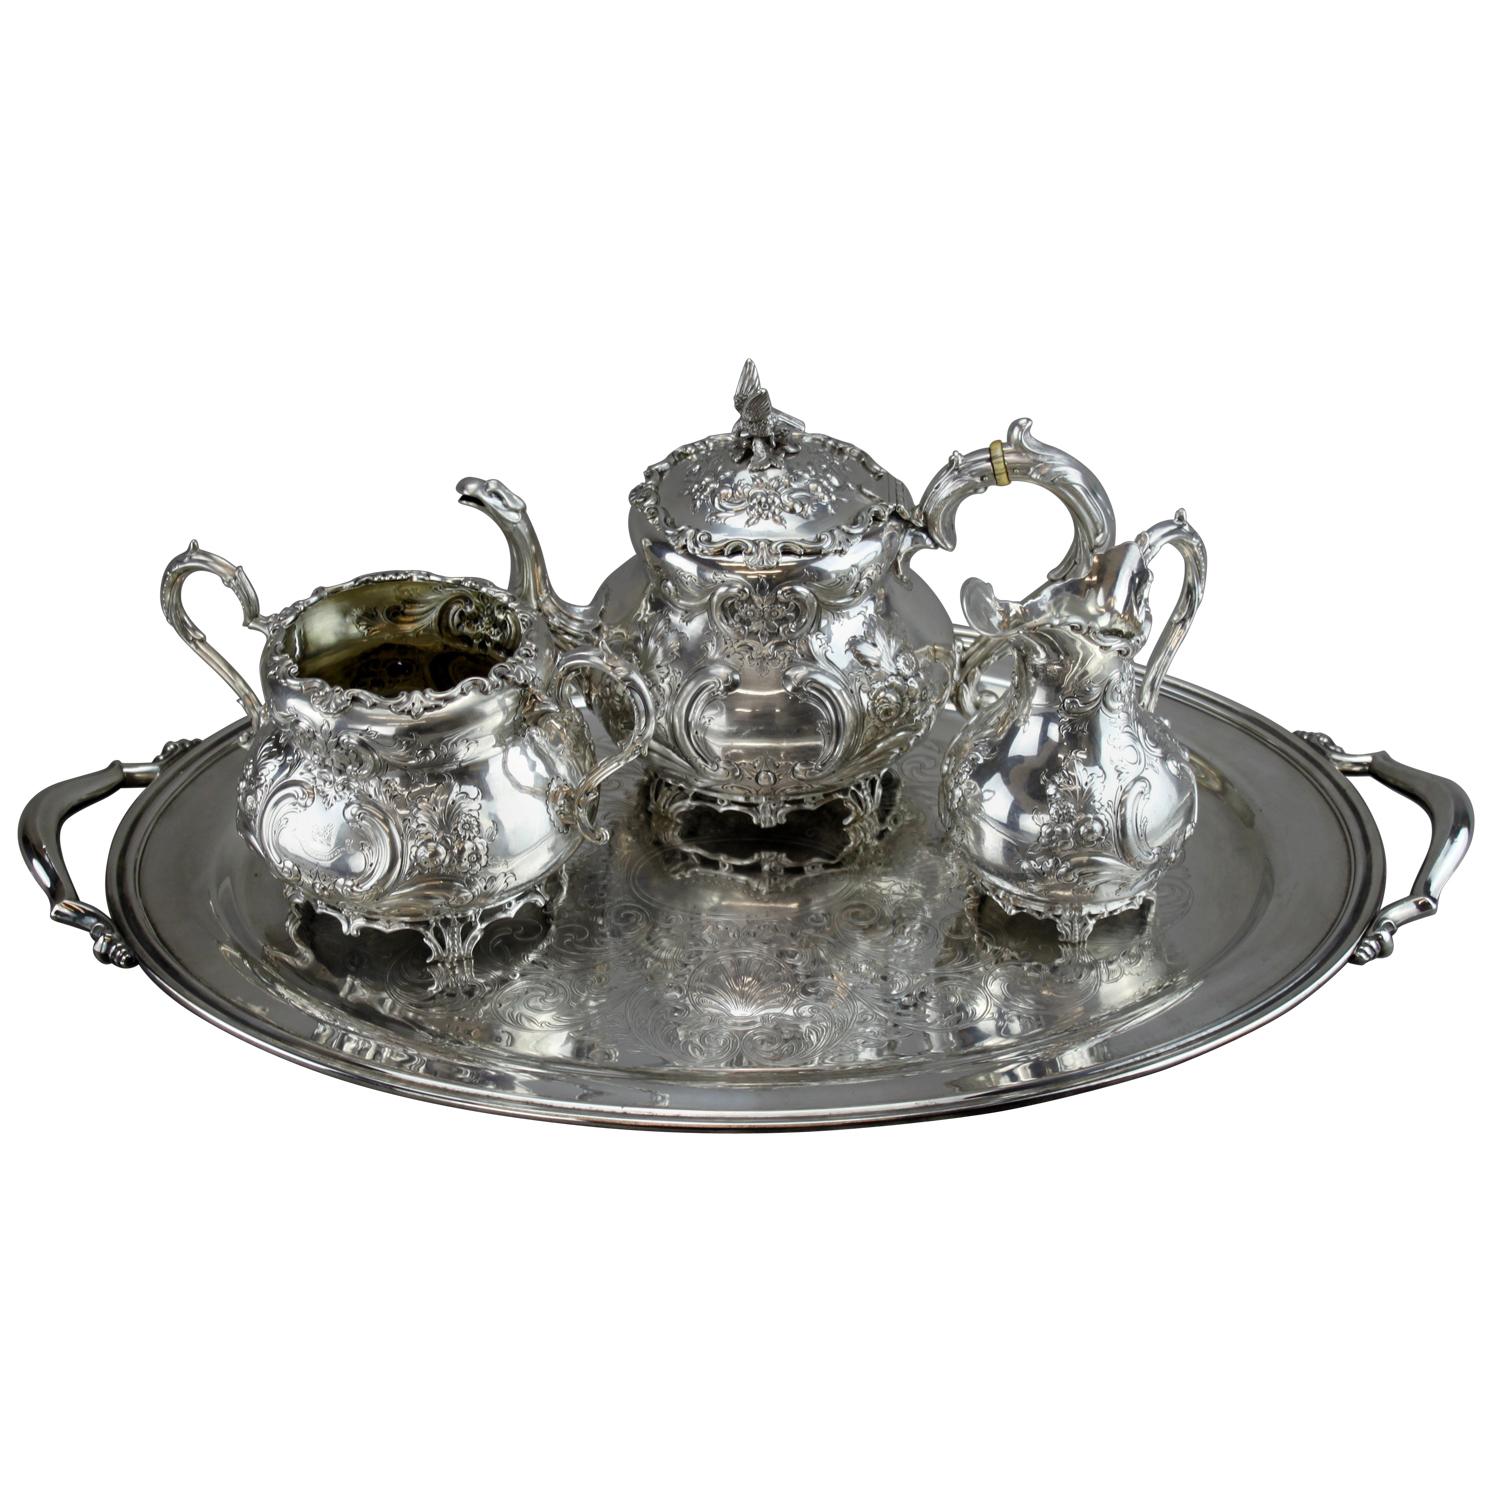 Antique Silver Tea Service Set, by Charles Lambe, Made in Dublin 1900